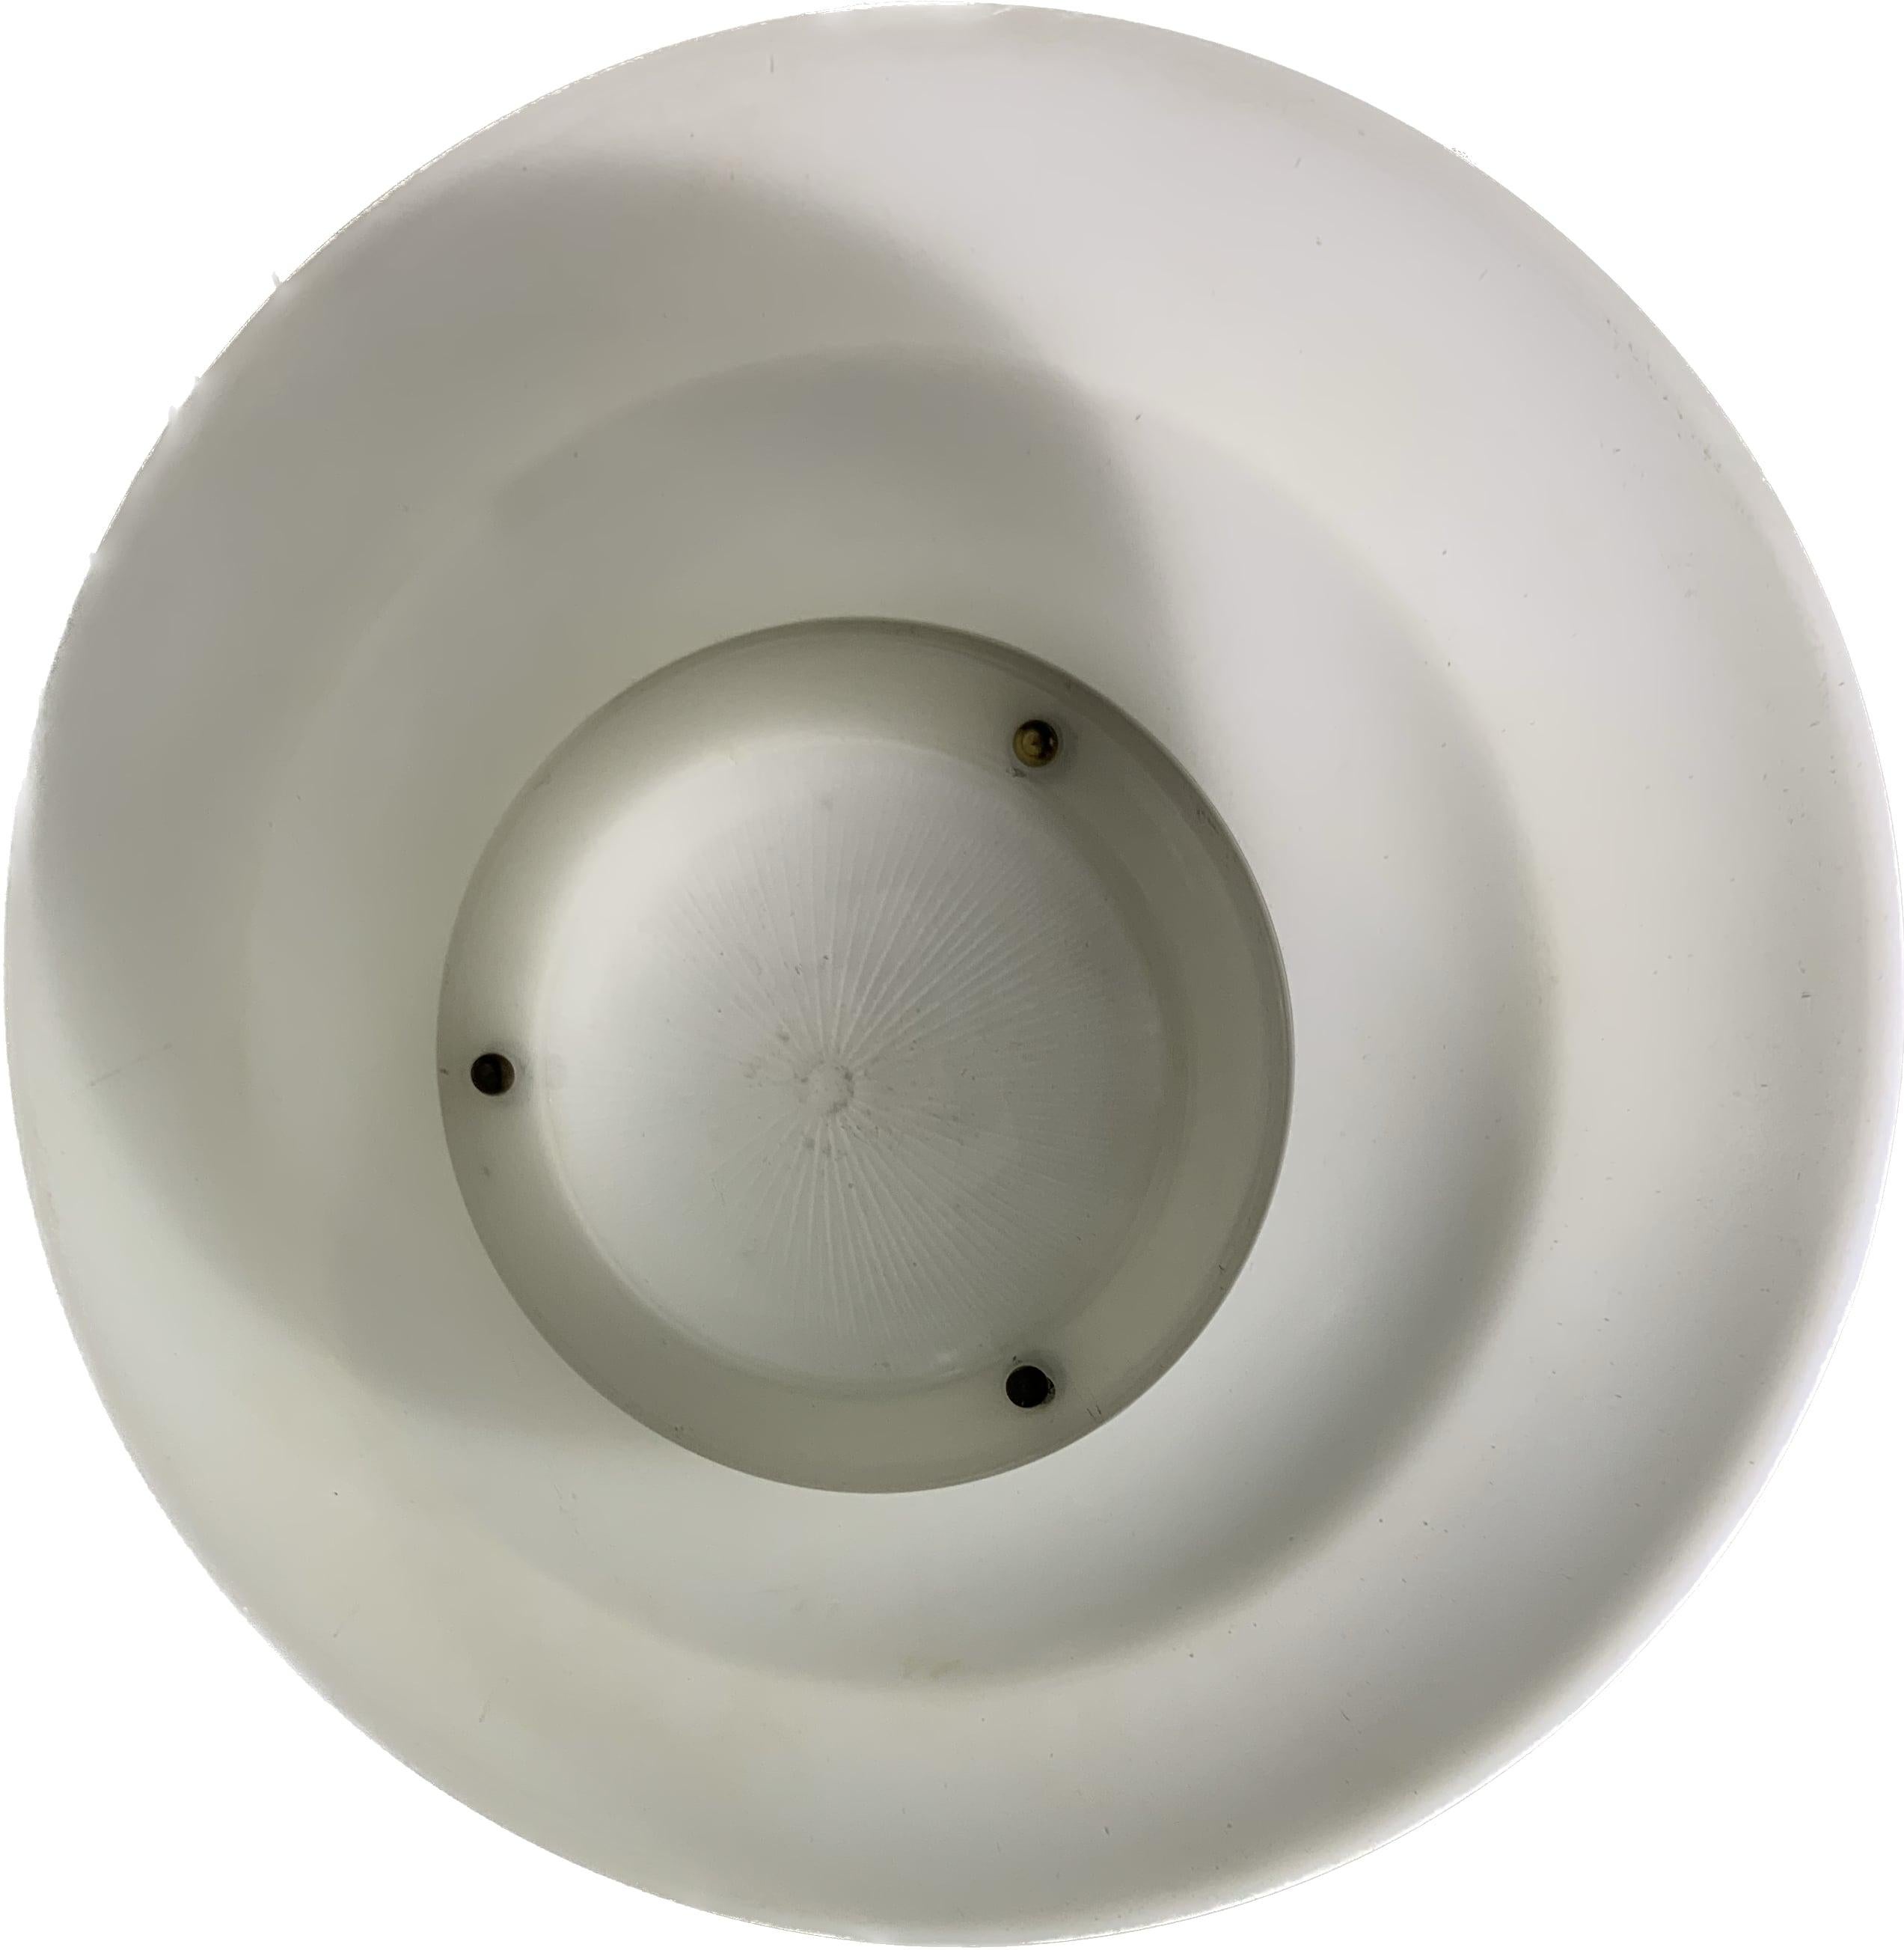 Ceiling pending fixture made with a rigid brushed chrome rod as a structure and with a round elegant opalescent glass. It is a very elegant and timeless piece.
Can be delivered and wired for American (110v) or European (220v) use upon request, the